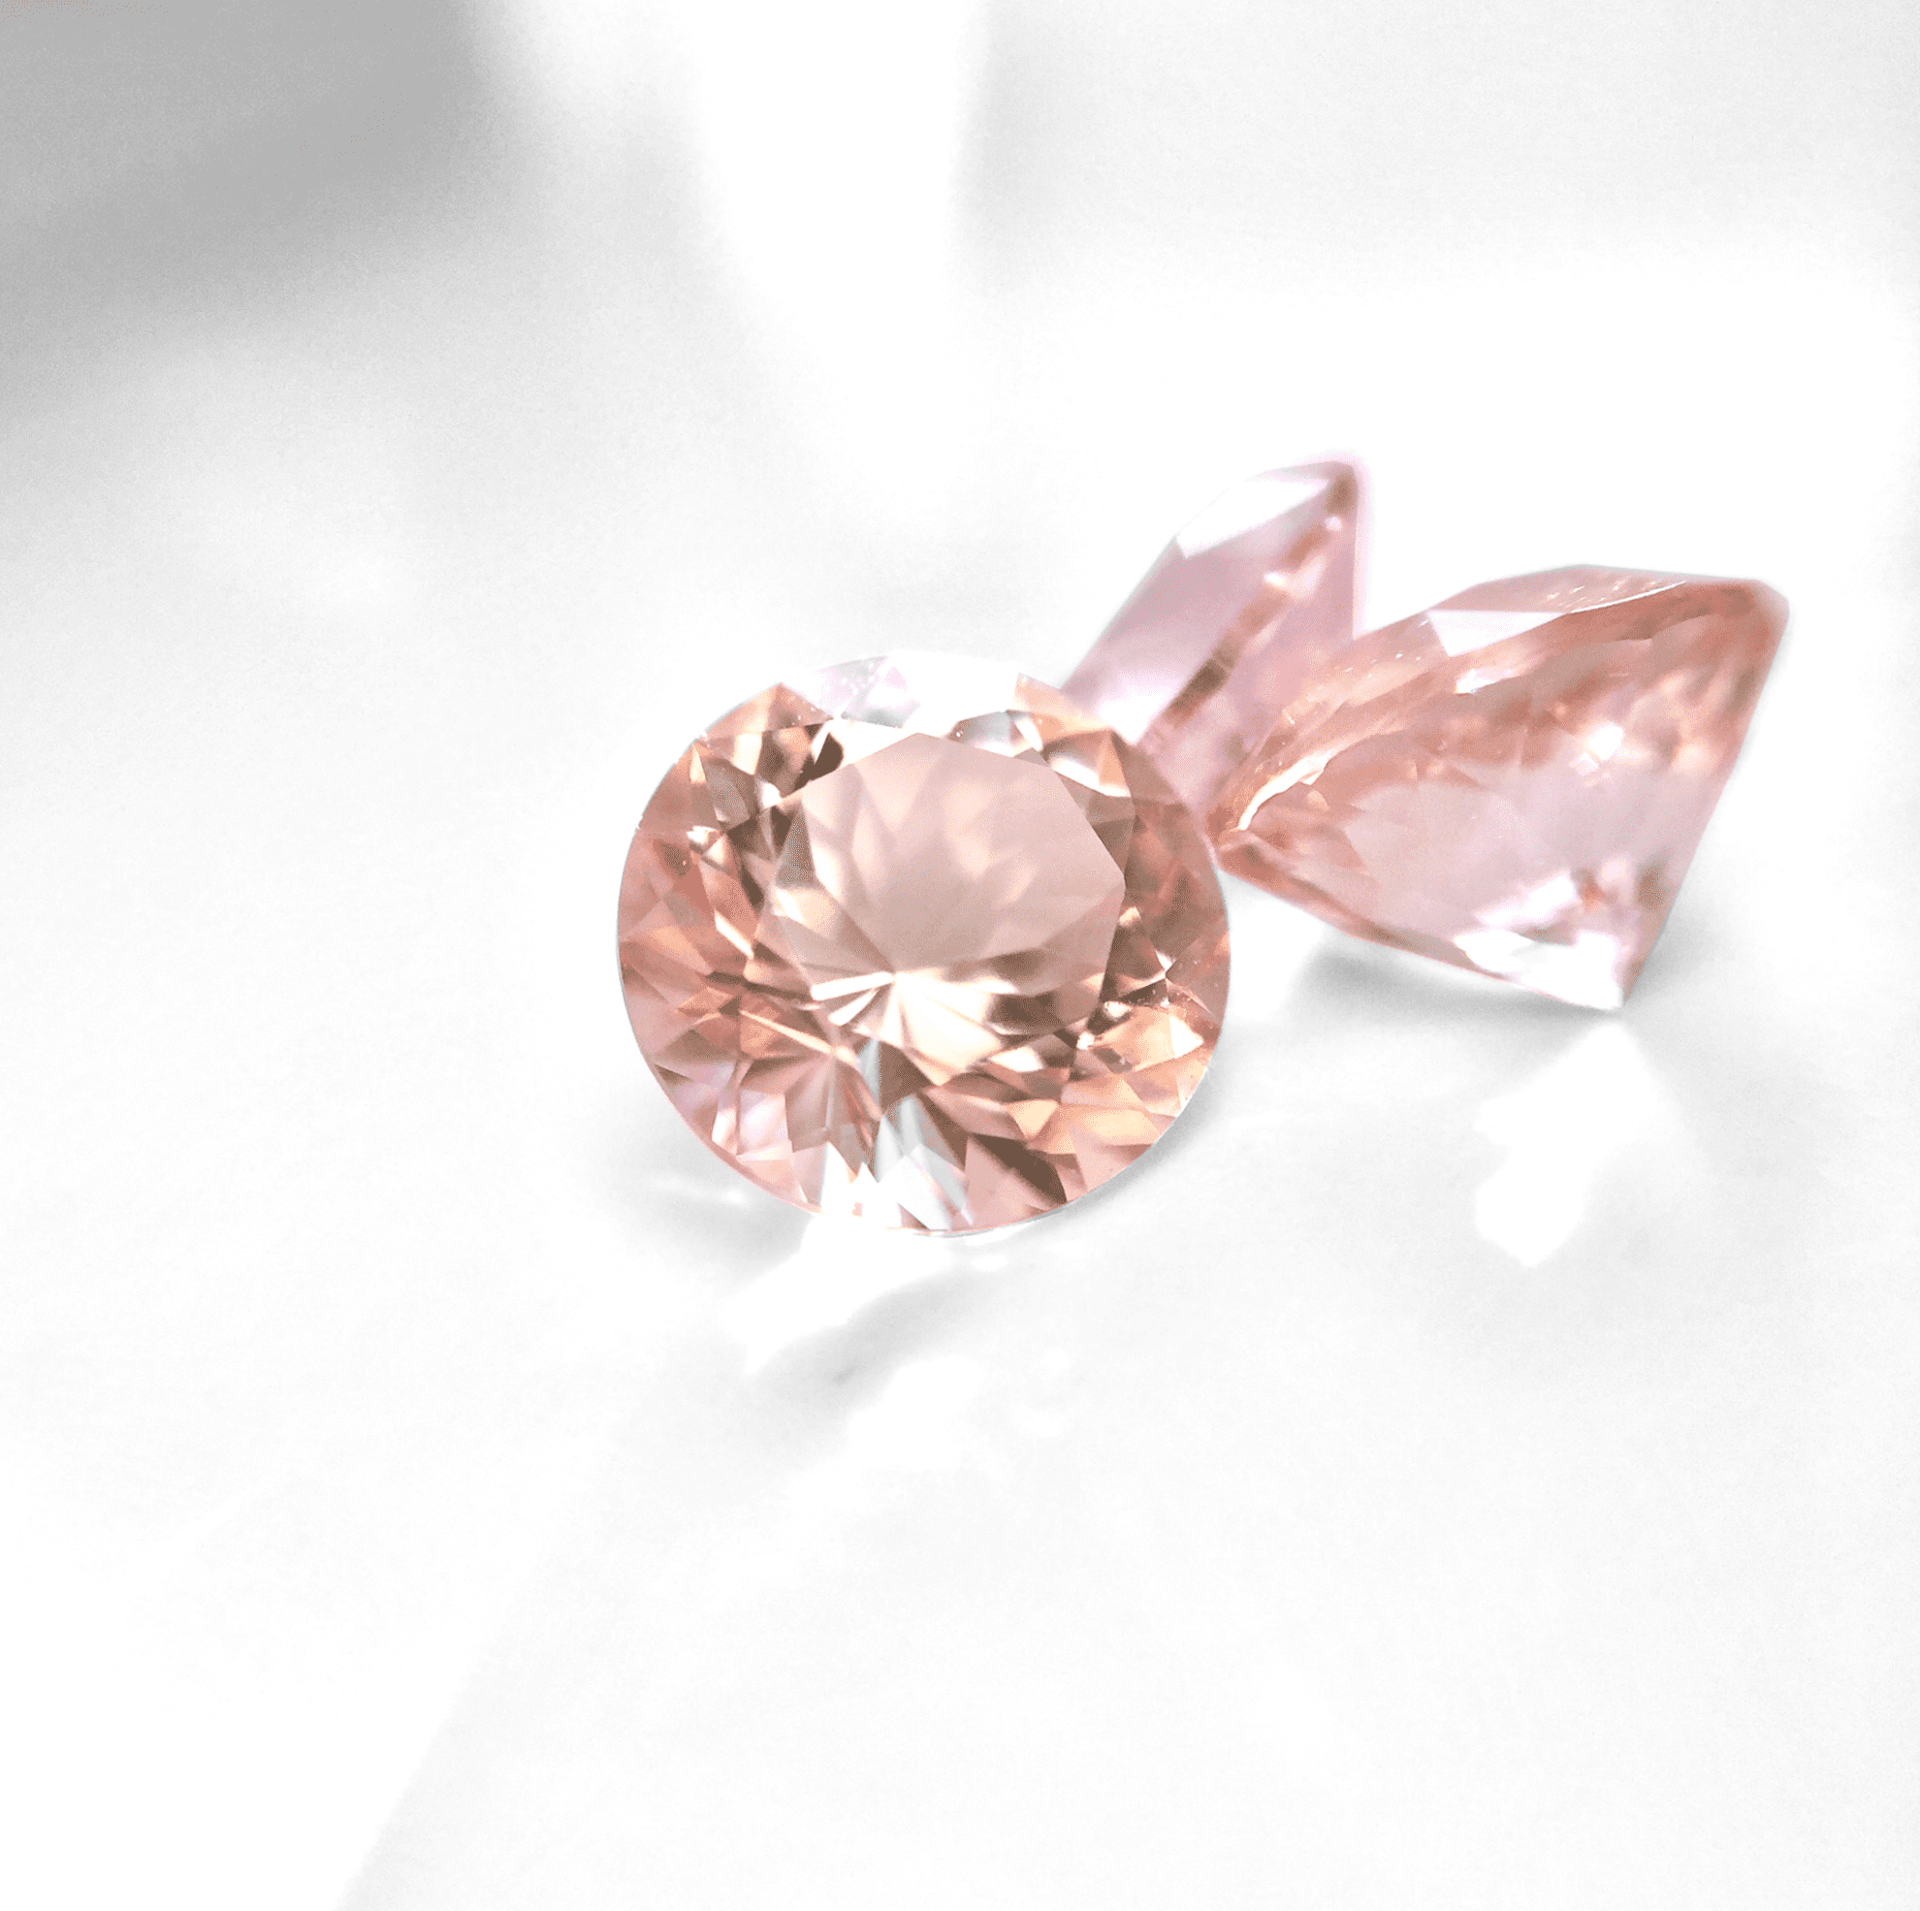 morganite buying guide - peach and pink cut stones